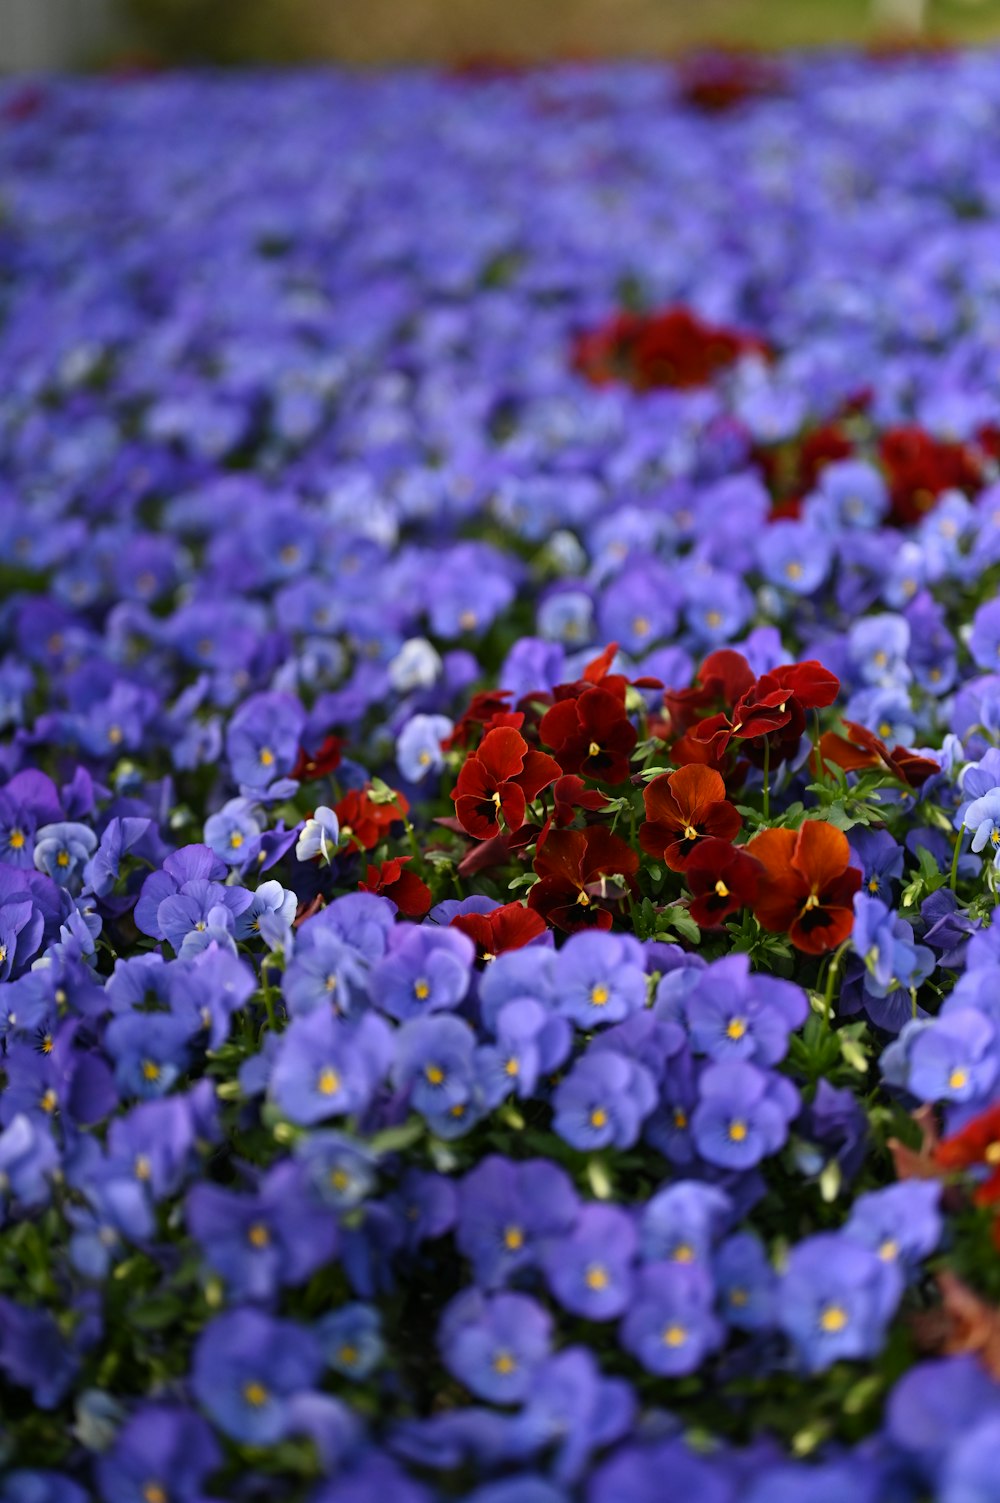 a field full of purple and red flowers